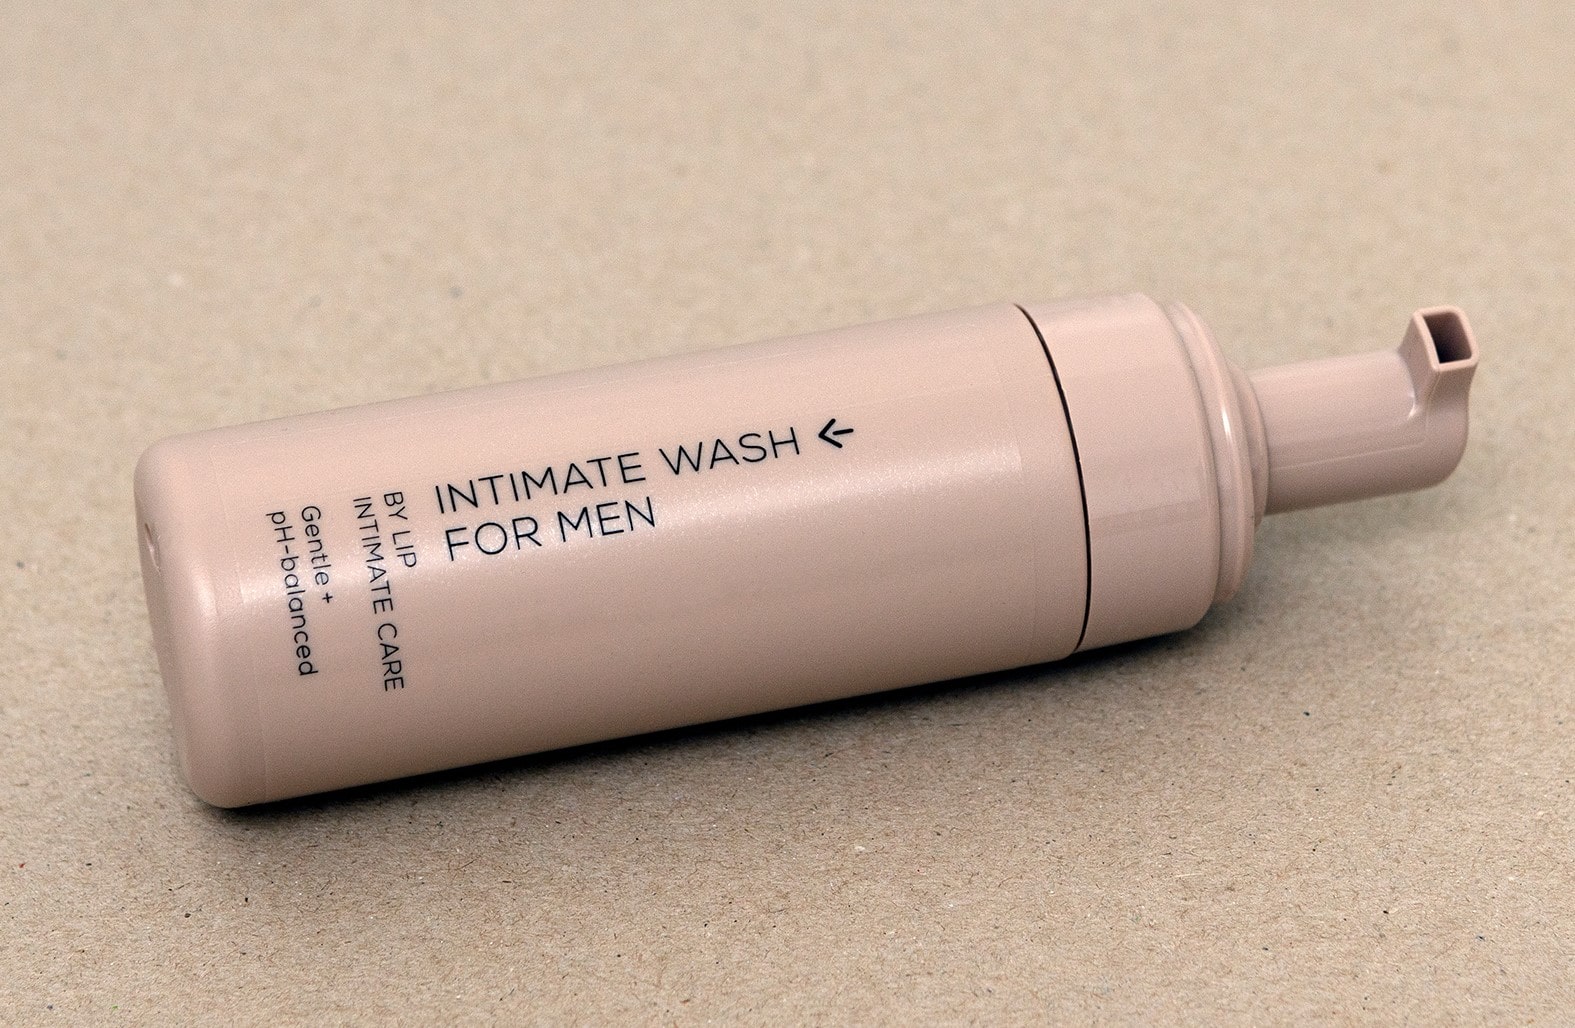 Intimate Wash for Men